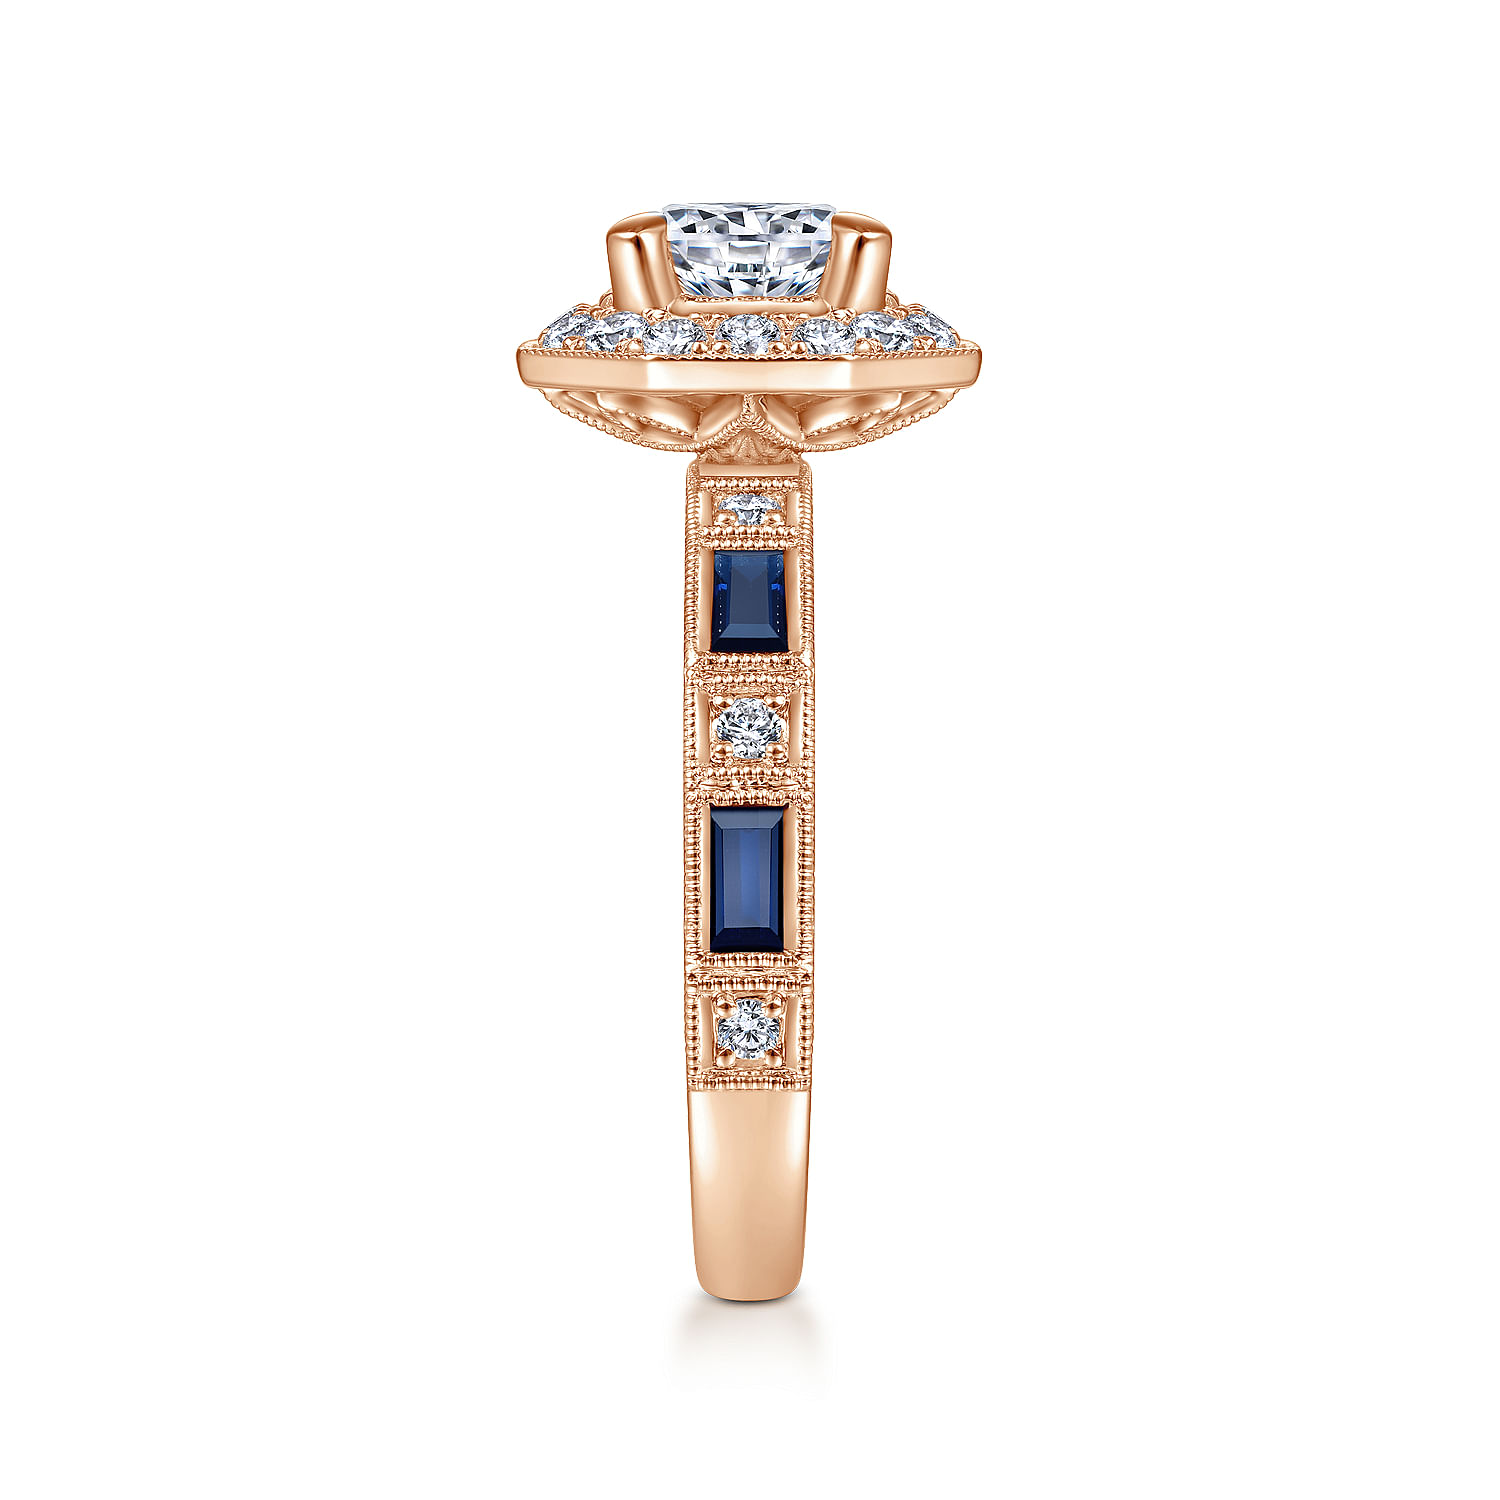 Art Deco 14K Rose Gold Octagonal Halo Round Diamond and Sapphire Engagement Ring